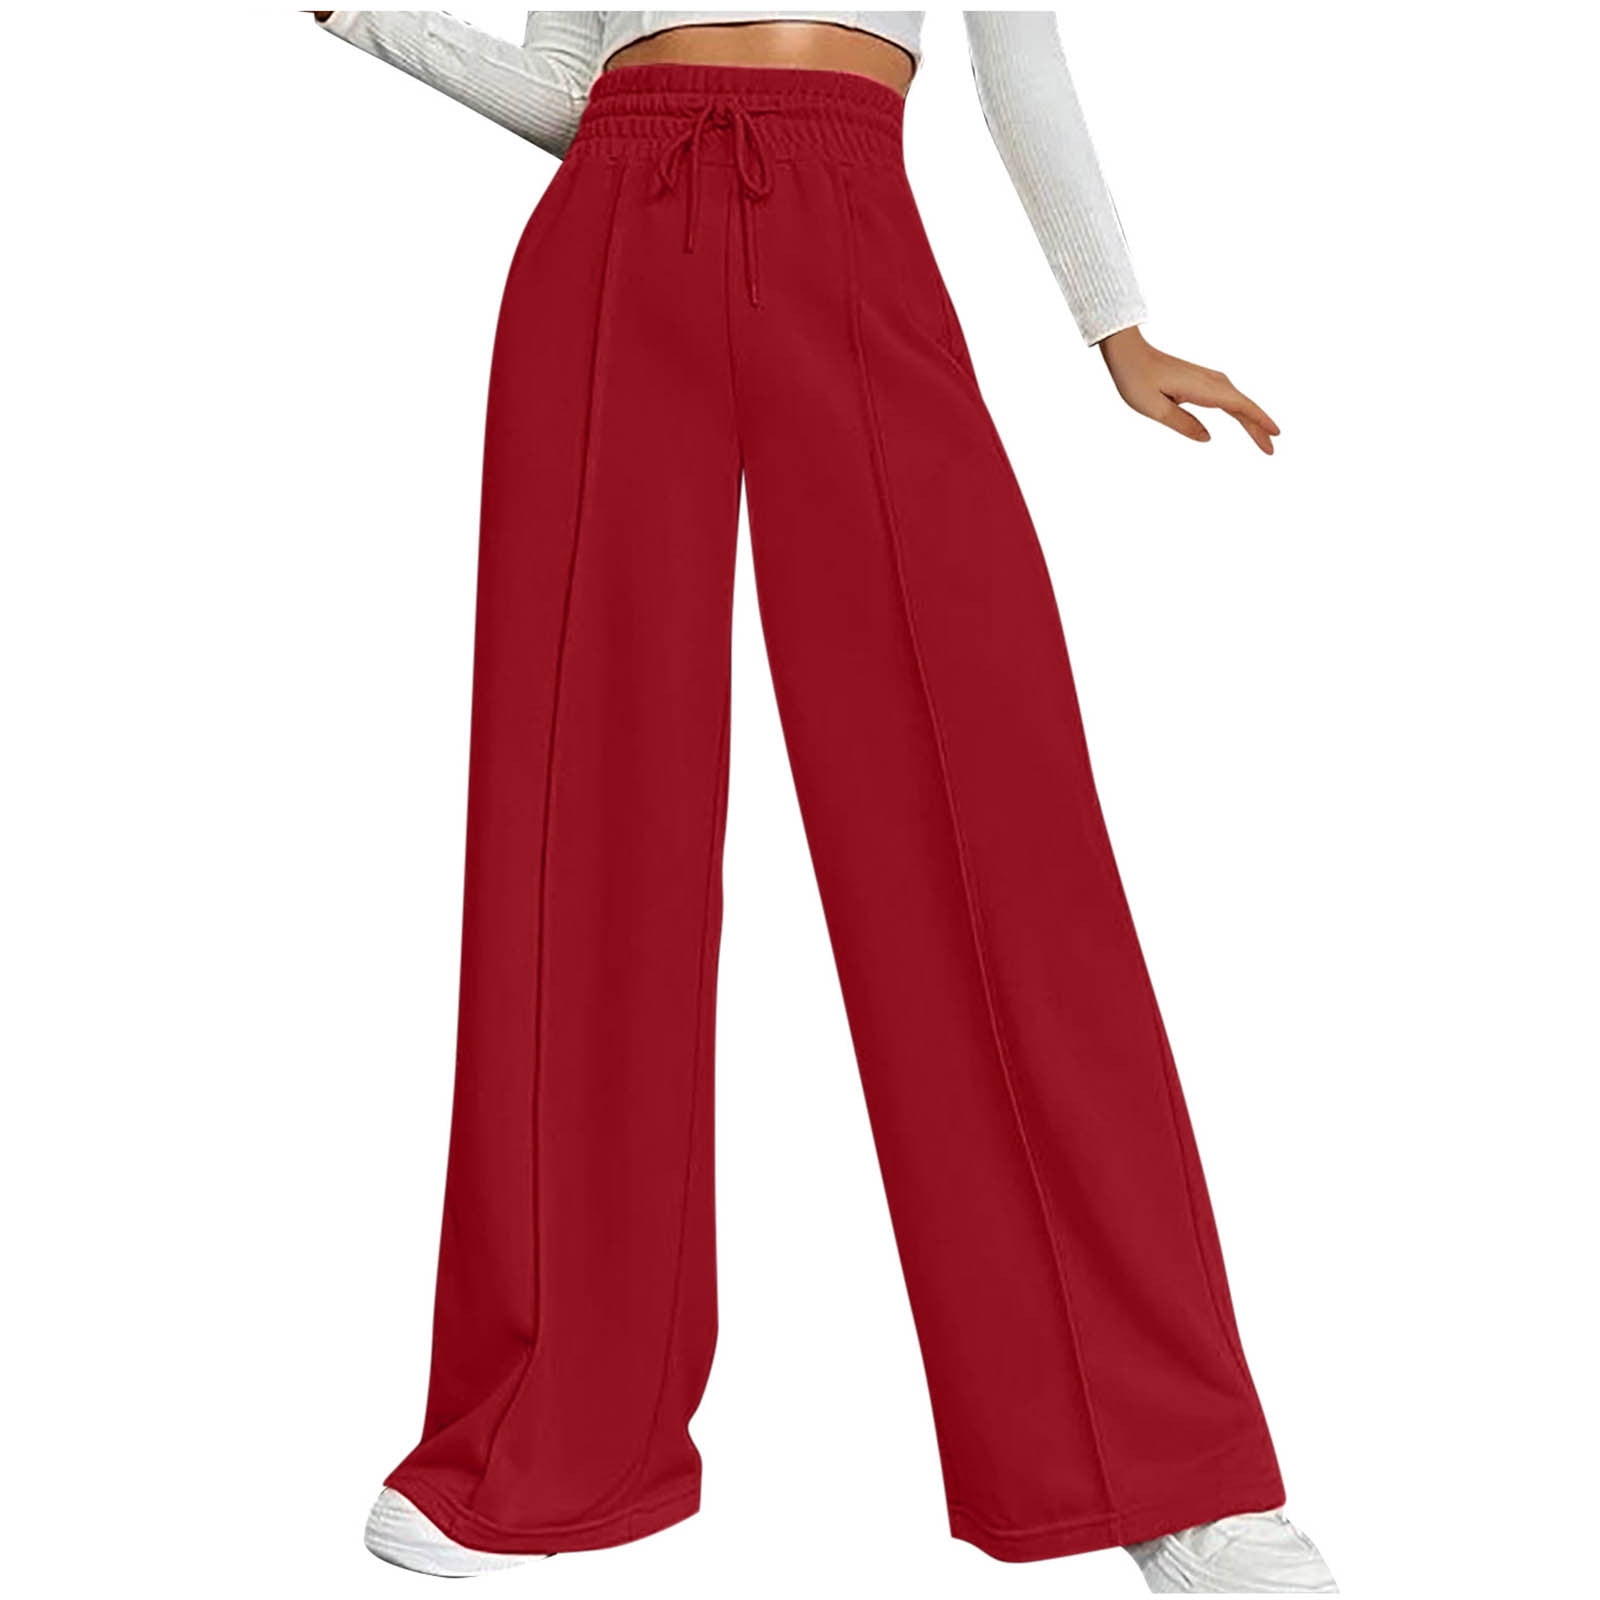 JWZUY Womens Wide Leg Pants Straight Trouser Elastic High Waist Full Pants  Plus Size Solid Pleated Pant Culottes Pant with Pocket Red XL 